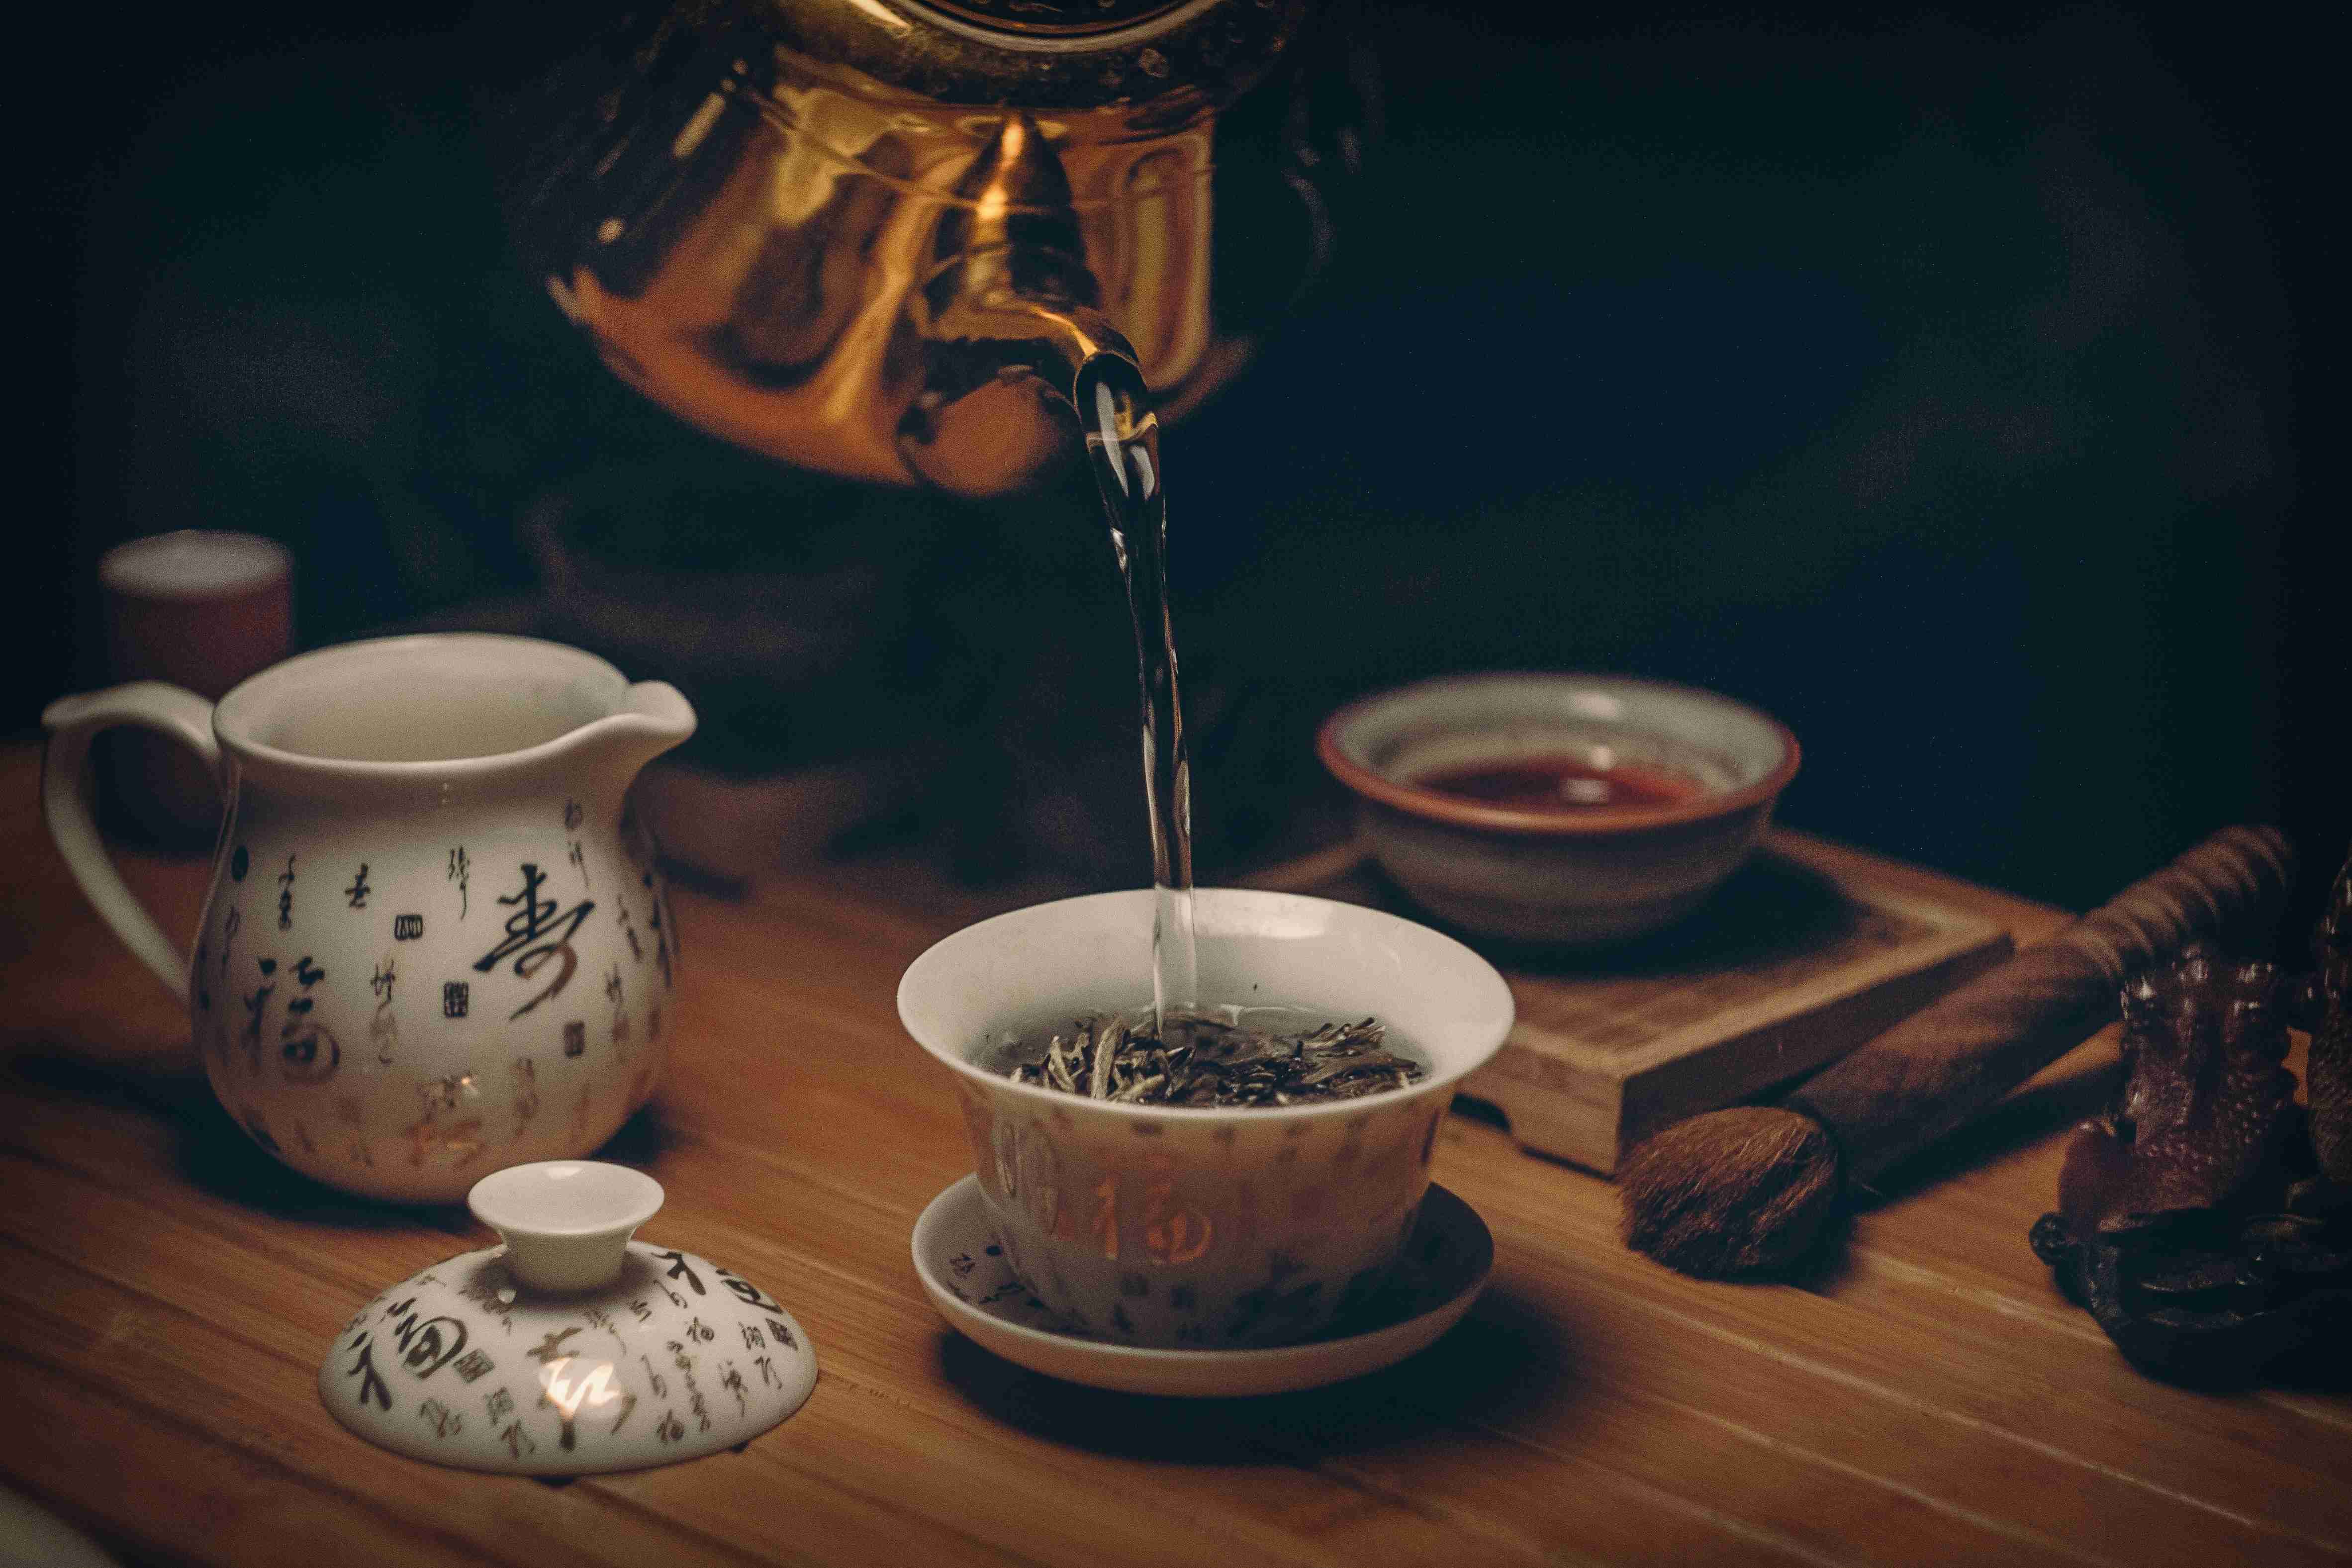 Tea is a drink that is beloved in Chinese culture